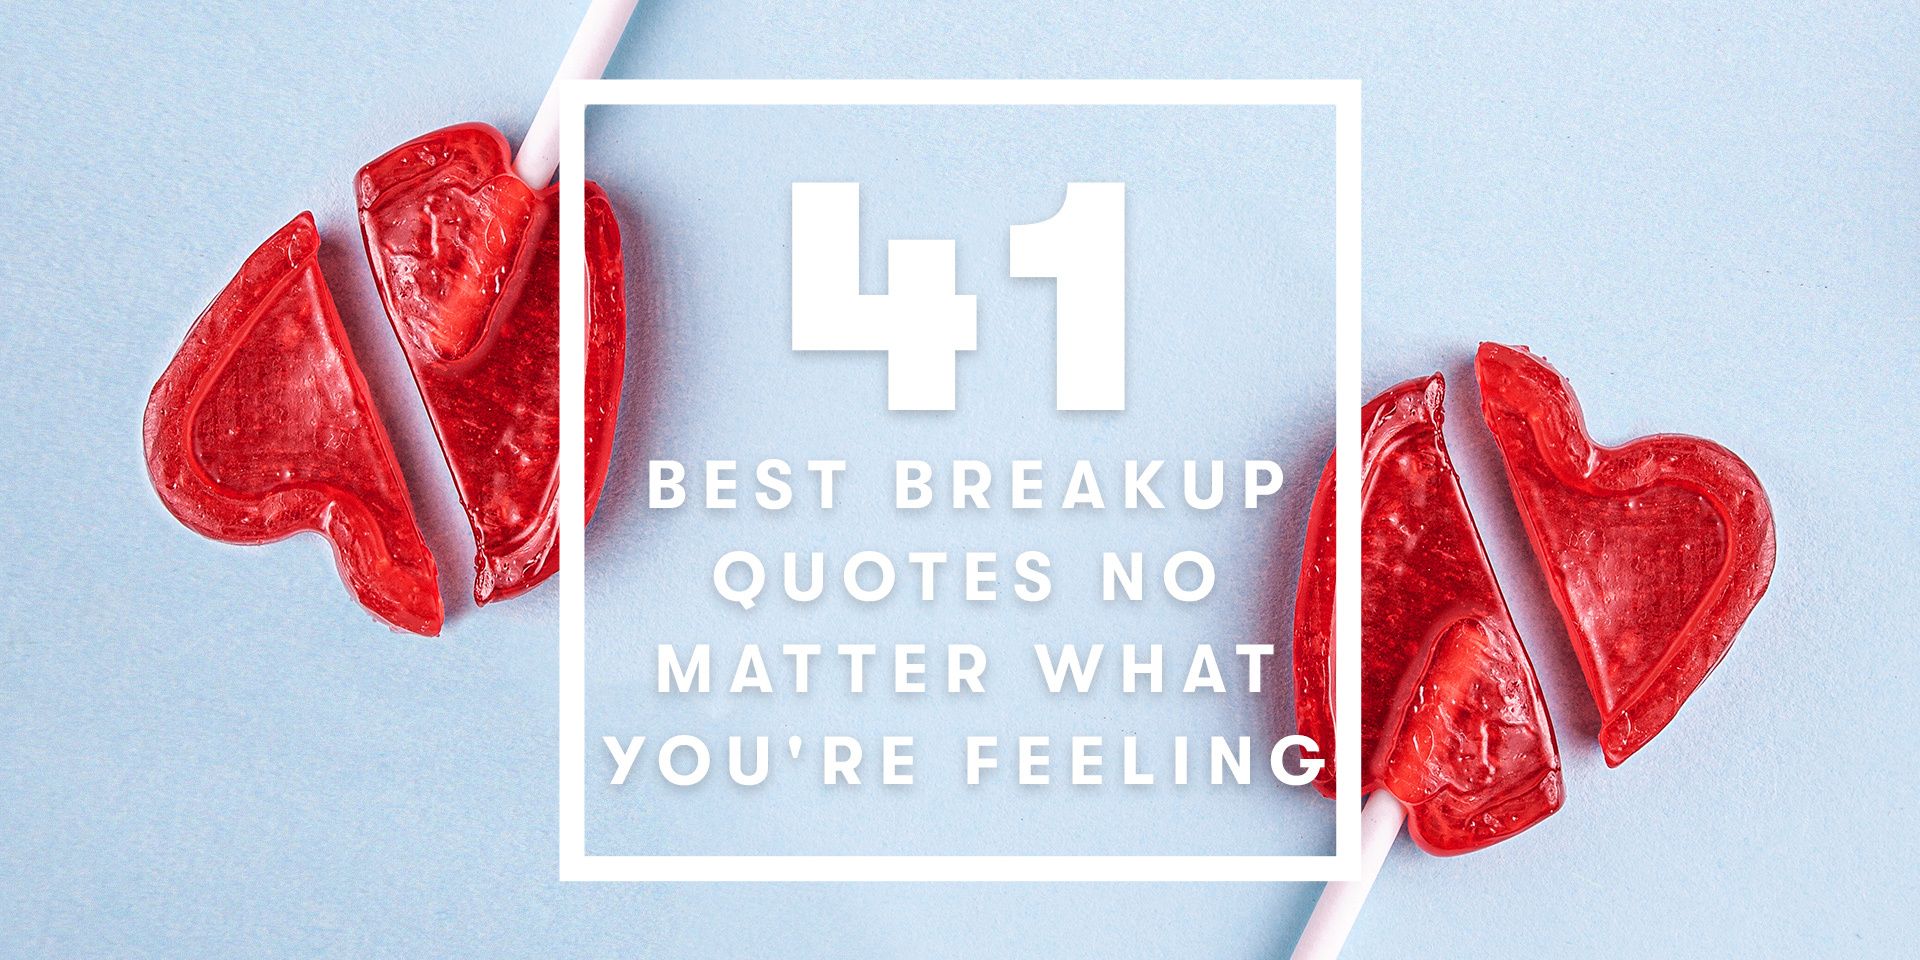 Sad break up quotes that will make you cry